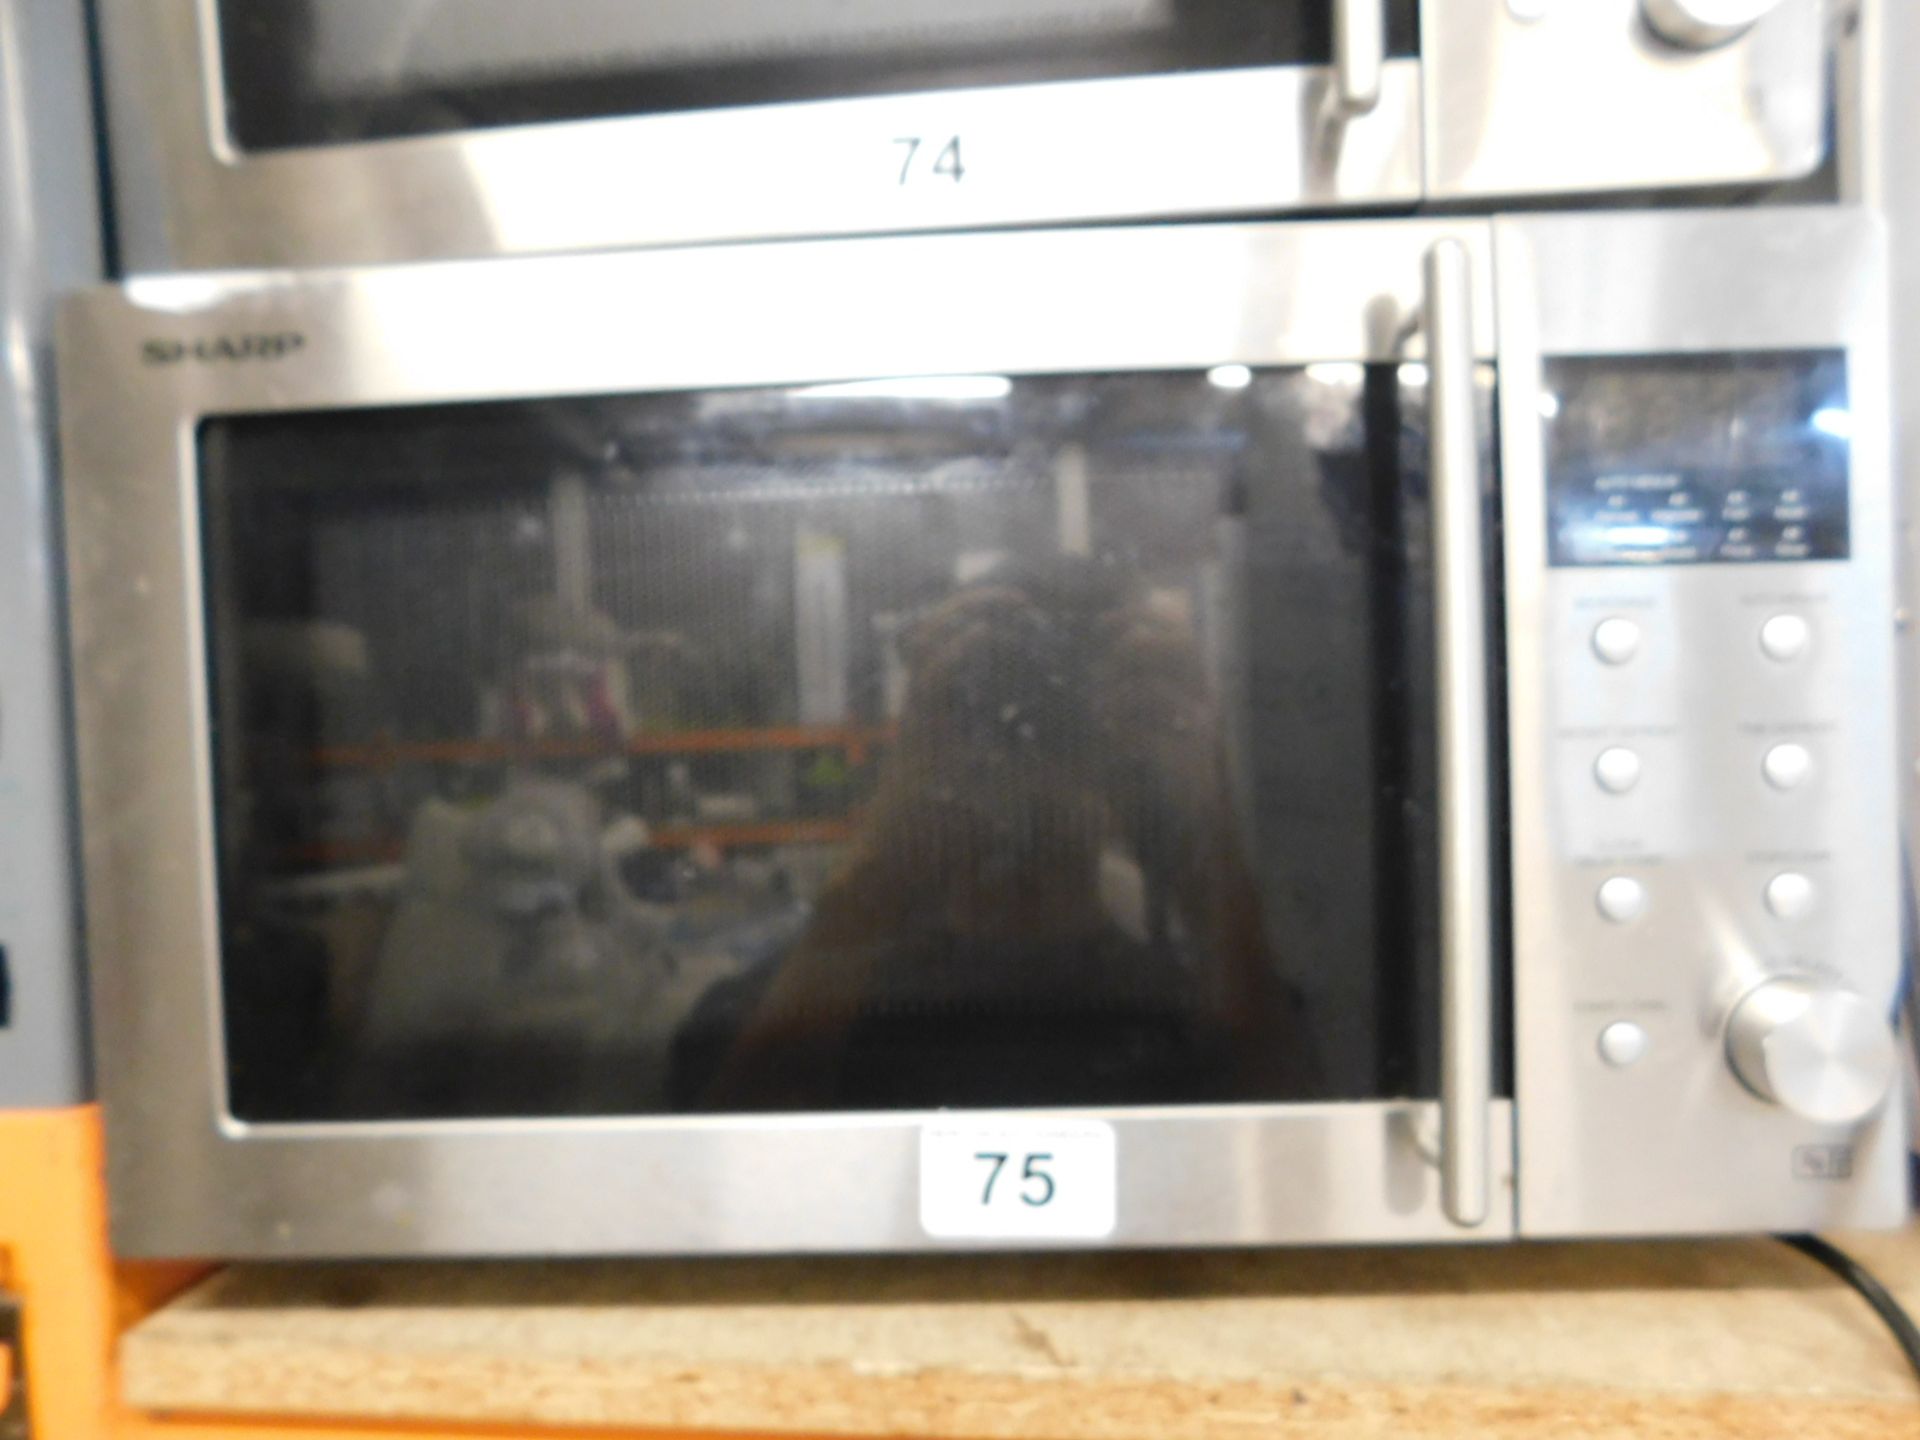 1 SHARP SOLO 23 LITRE STAINLESS STEEL MICROWAVE OVEN RRP £179.99